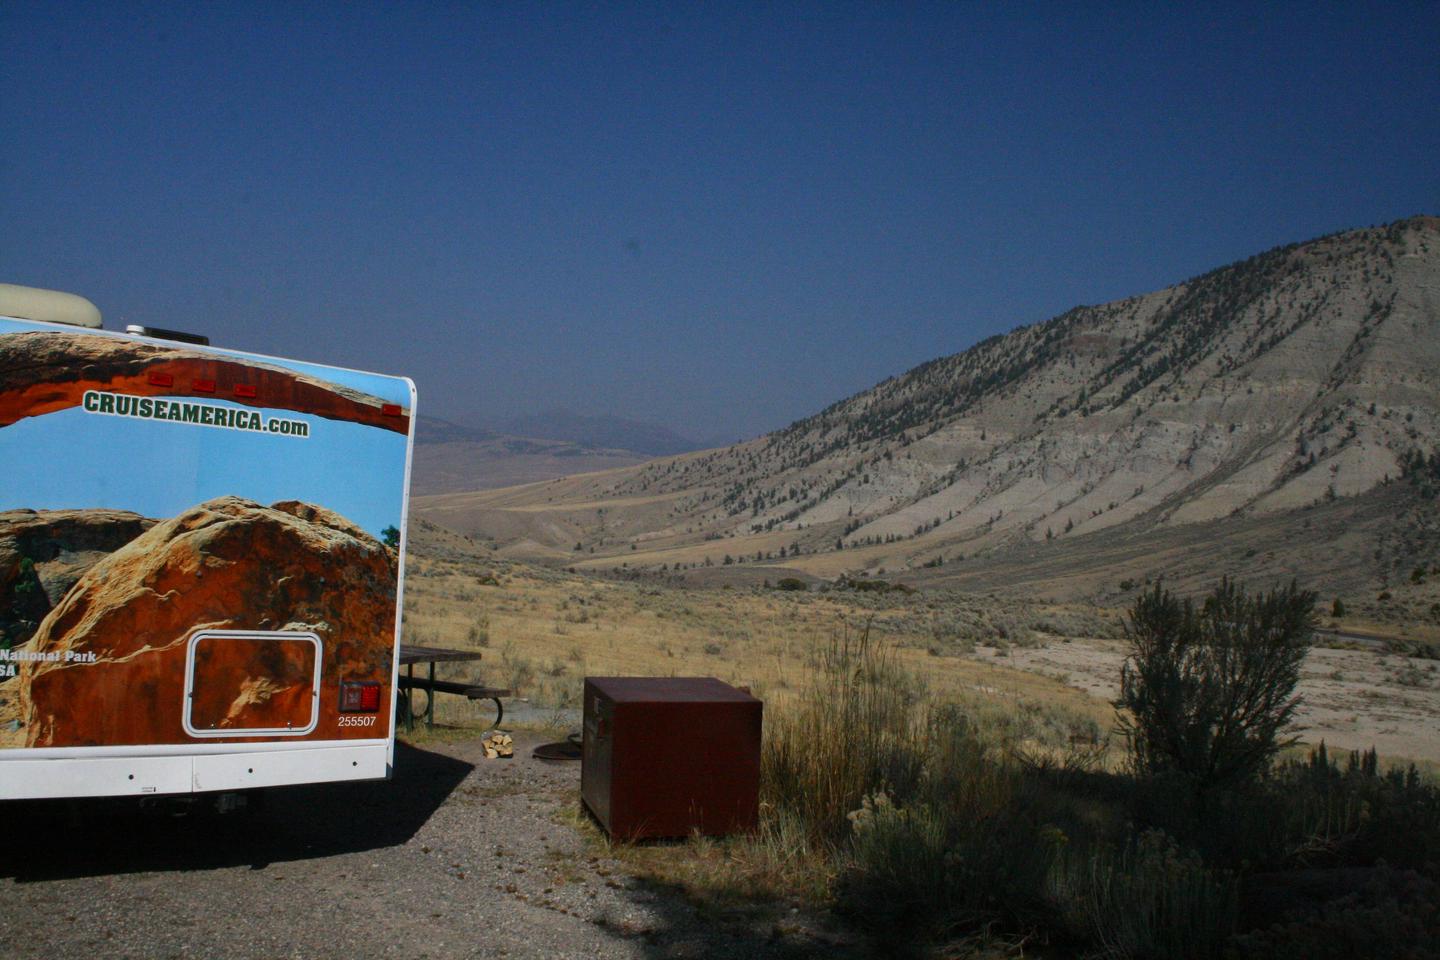 Mammoth Hot Springs Campground Site 37Mammoth Hot Springs Campground Site 37, looking north